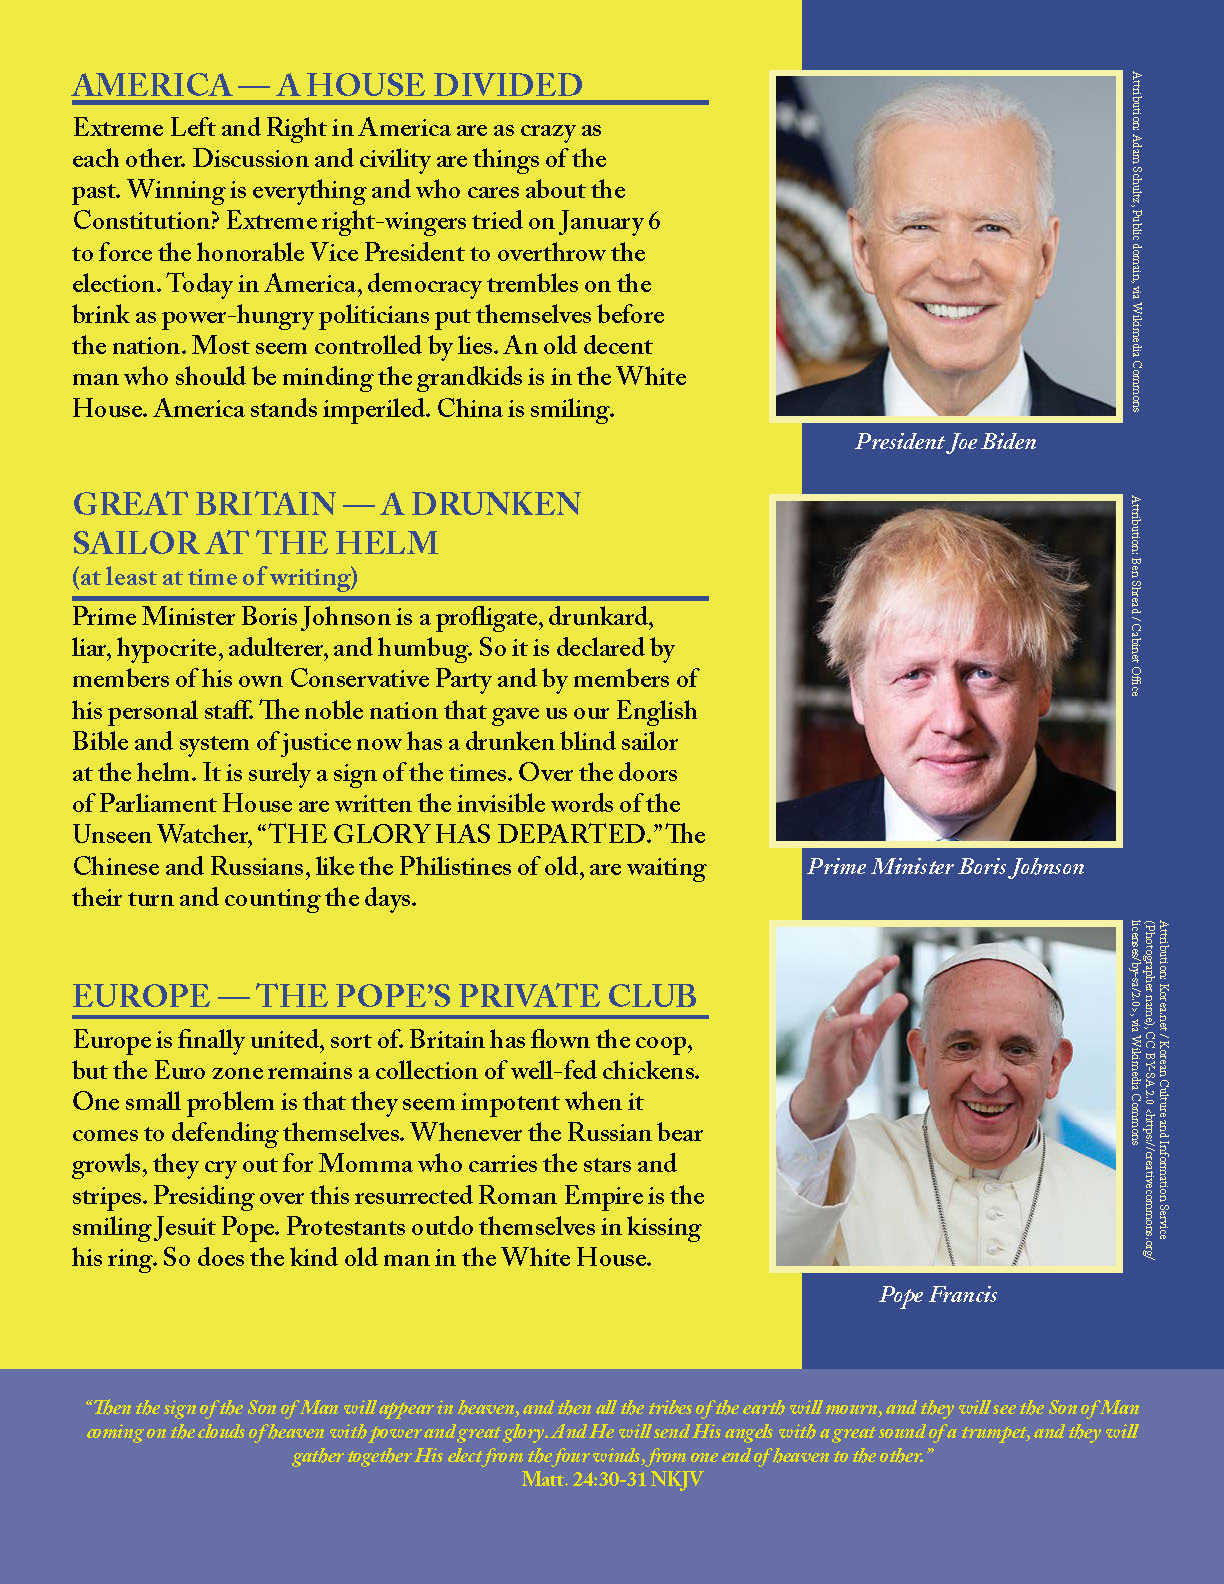 America - A house Divided, Great Britain - A drunken Sailor at the helm and Europe - The Pope's Private Club